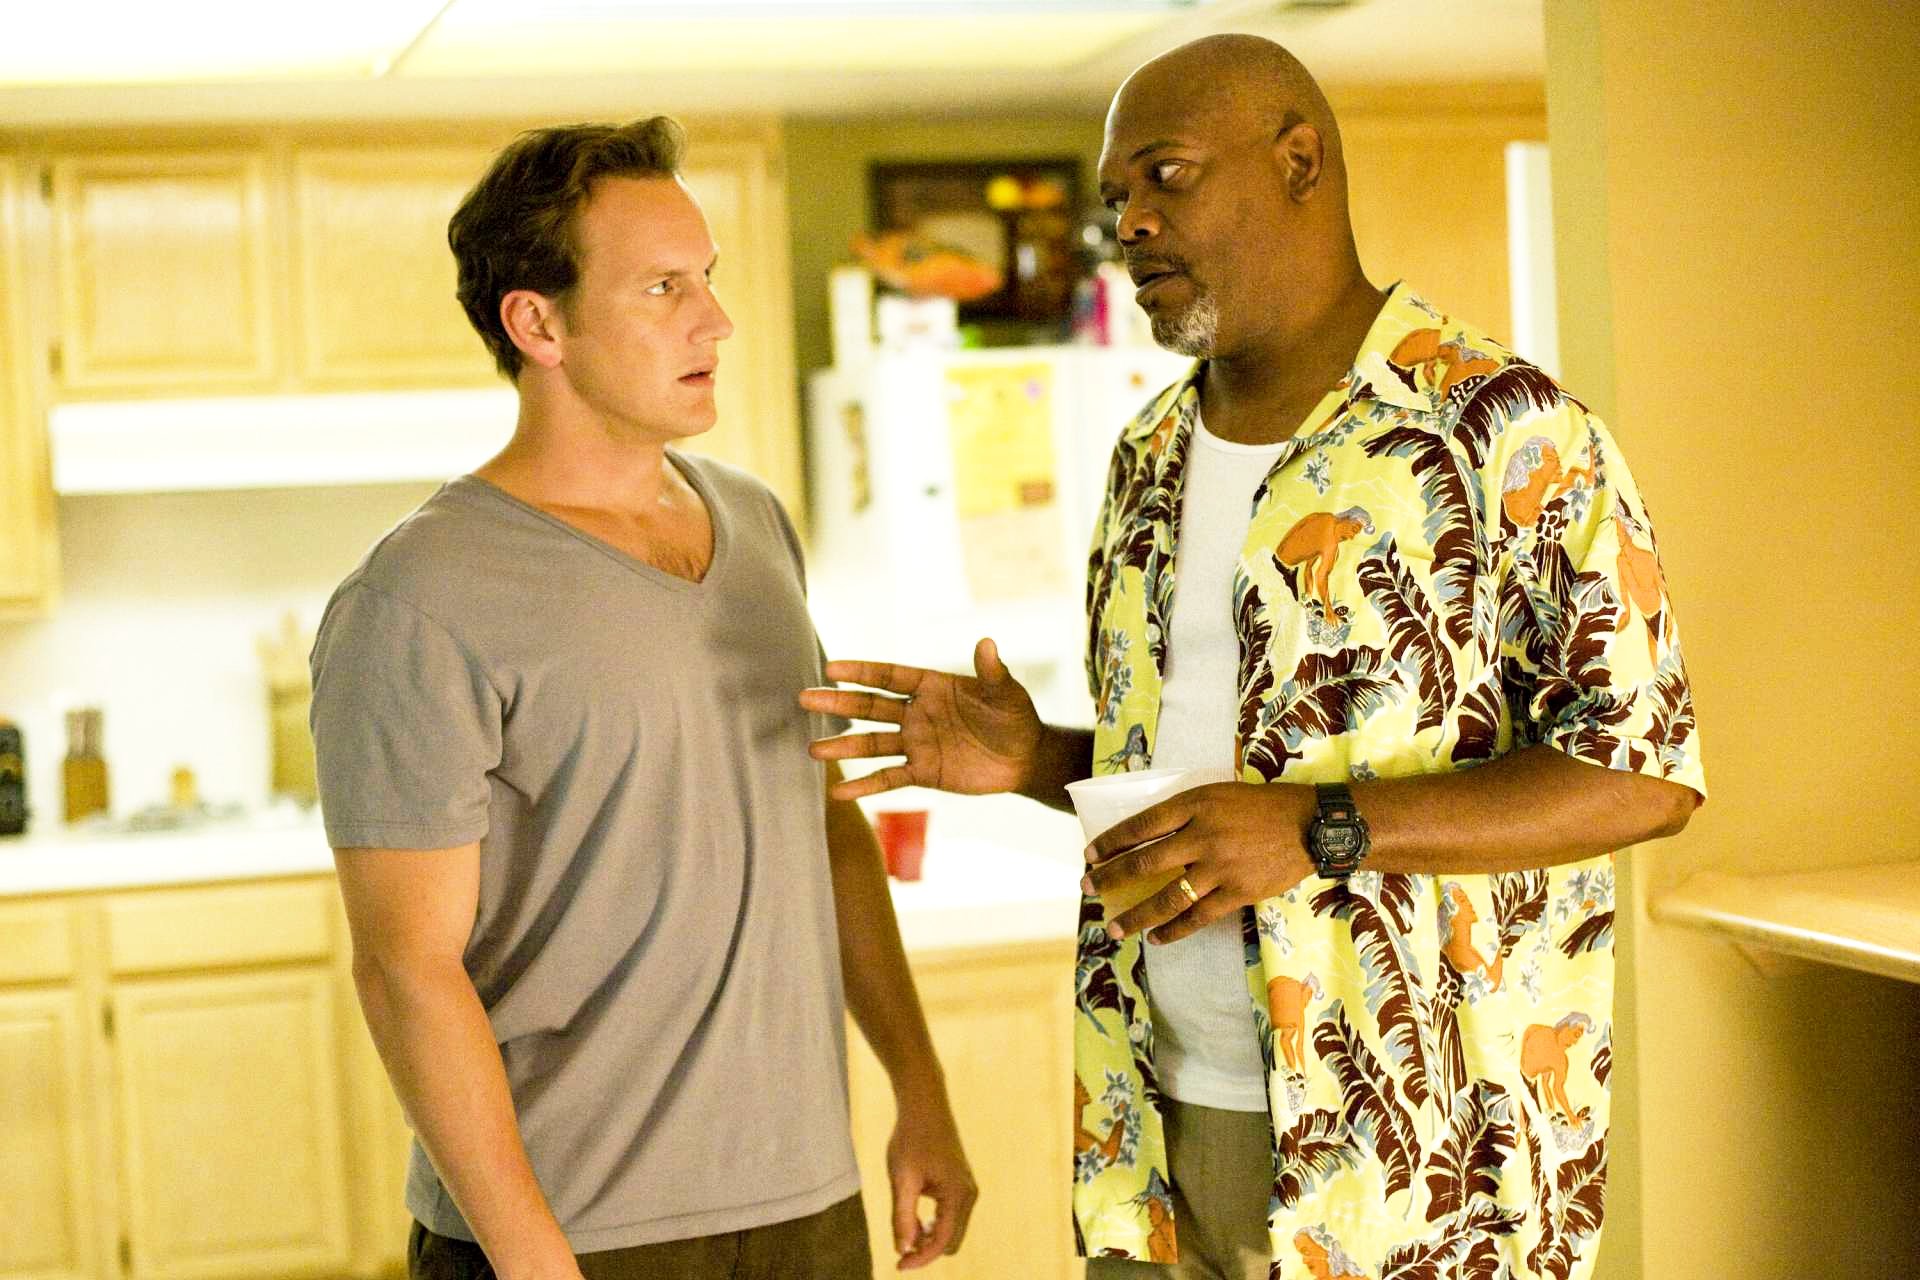 Patrick Wilson stars as Chris Mattson and Samuel L. Jackson stars as Abel Turner in Screen Gems' Lakeview Terrace (2008). Photo credit by Chuck Zlotnick.